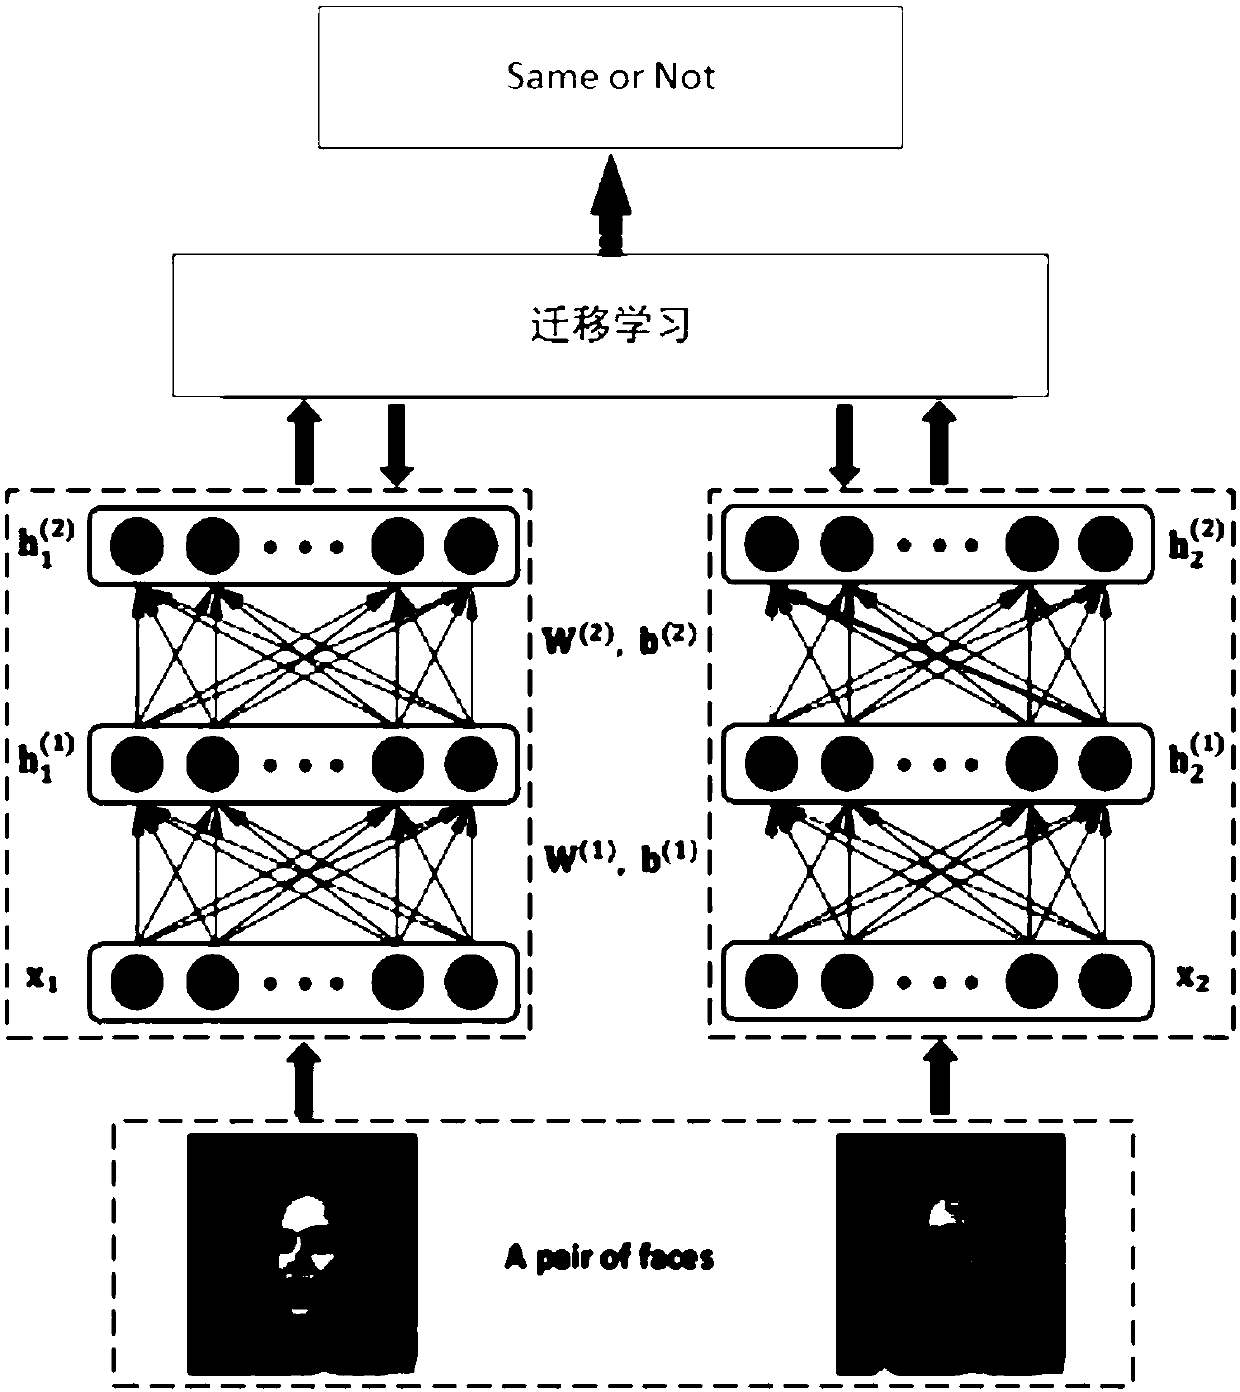 Face recognition method based on migration layered network